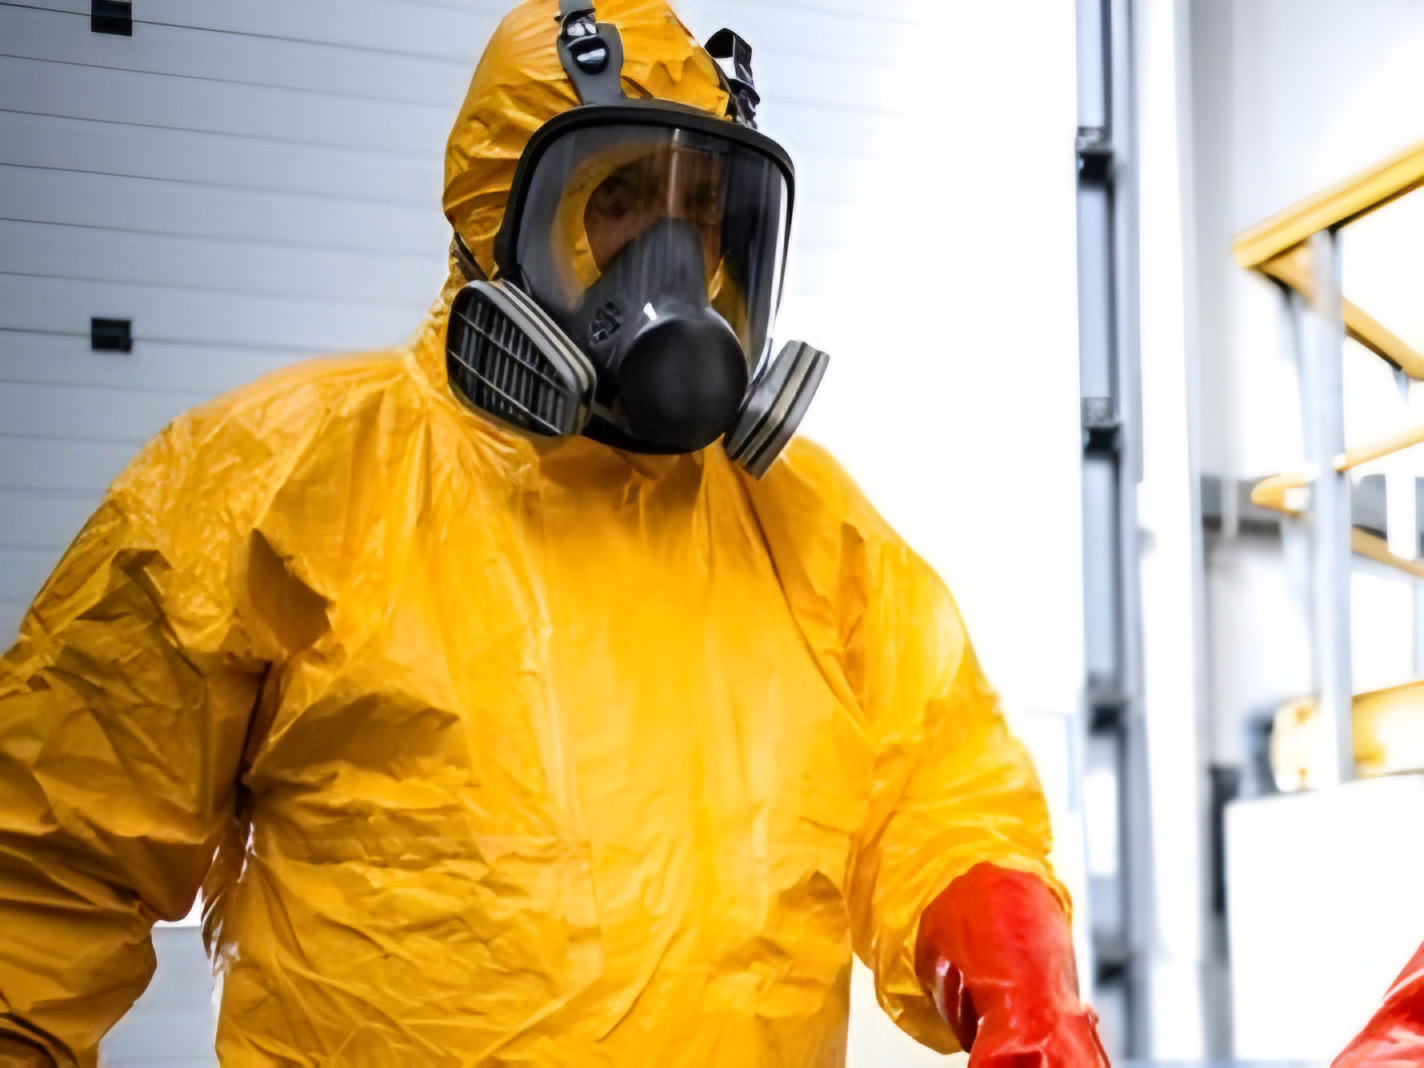 Image showing two individuals in PPE kits cleaning hazardous chemical gases commonly found in household, kitchen, and office waste. Accompanying text highlights potential health risks including eye, respiratory, and nervous system effects from exposure to these gases